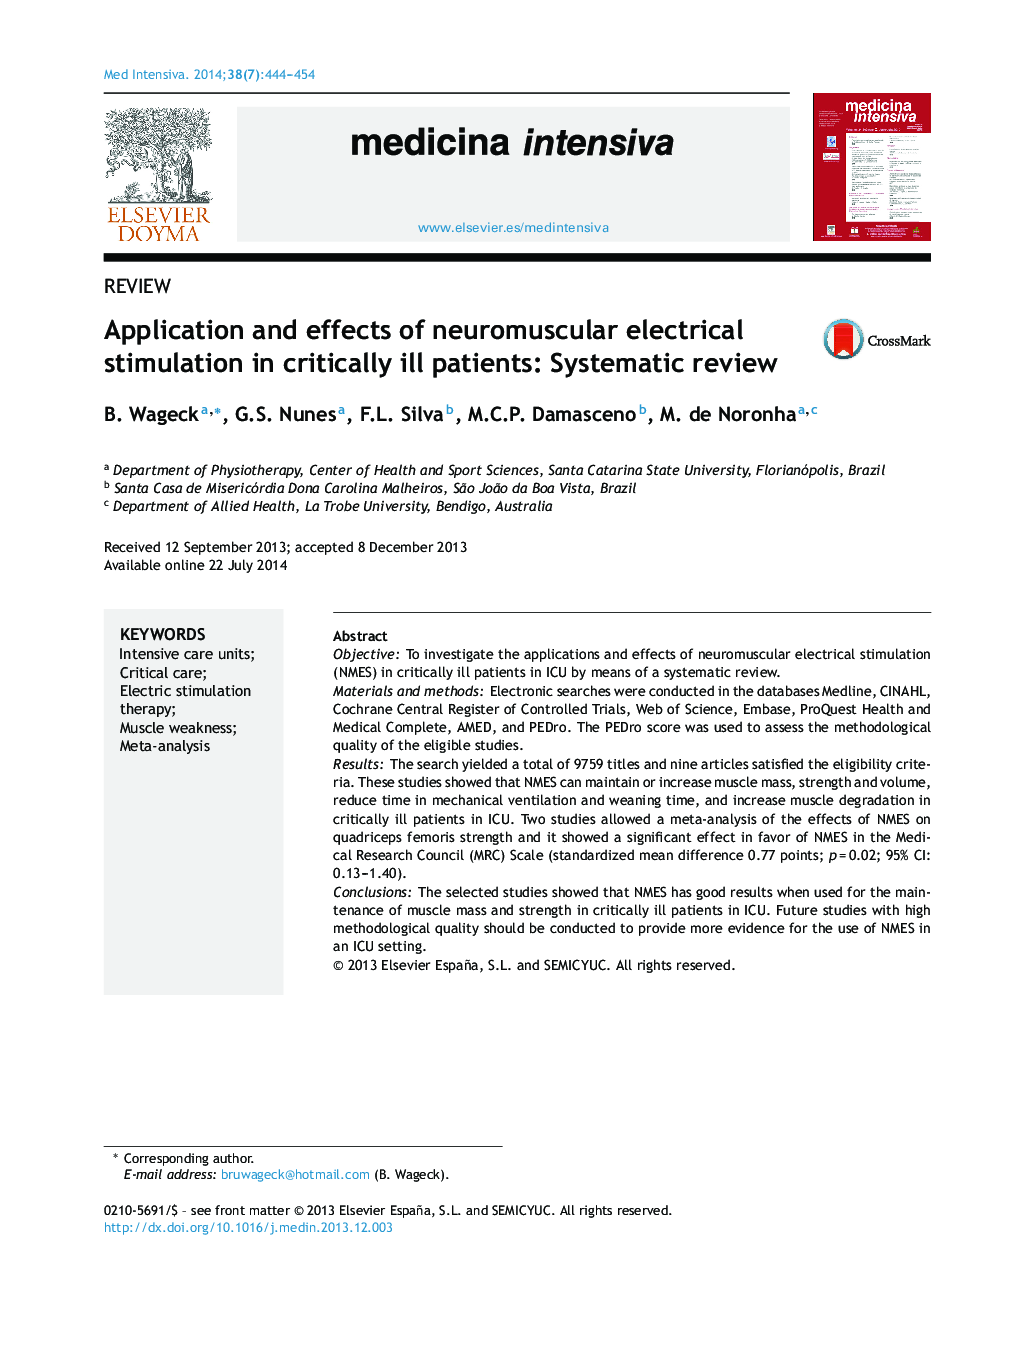 Application and effects of neuromuscular electrical stimulation in critically ill patients: Systematic review